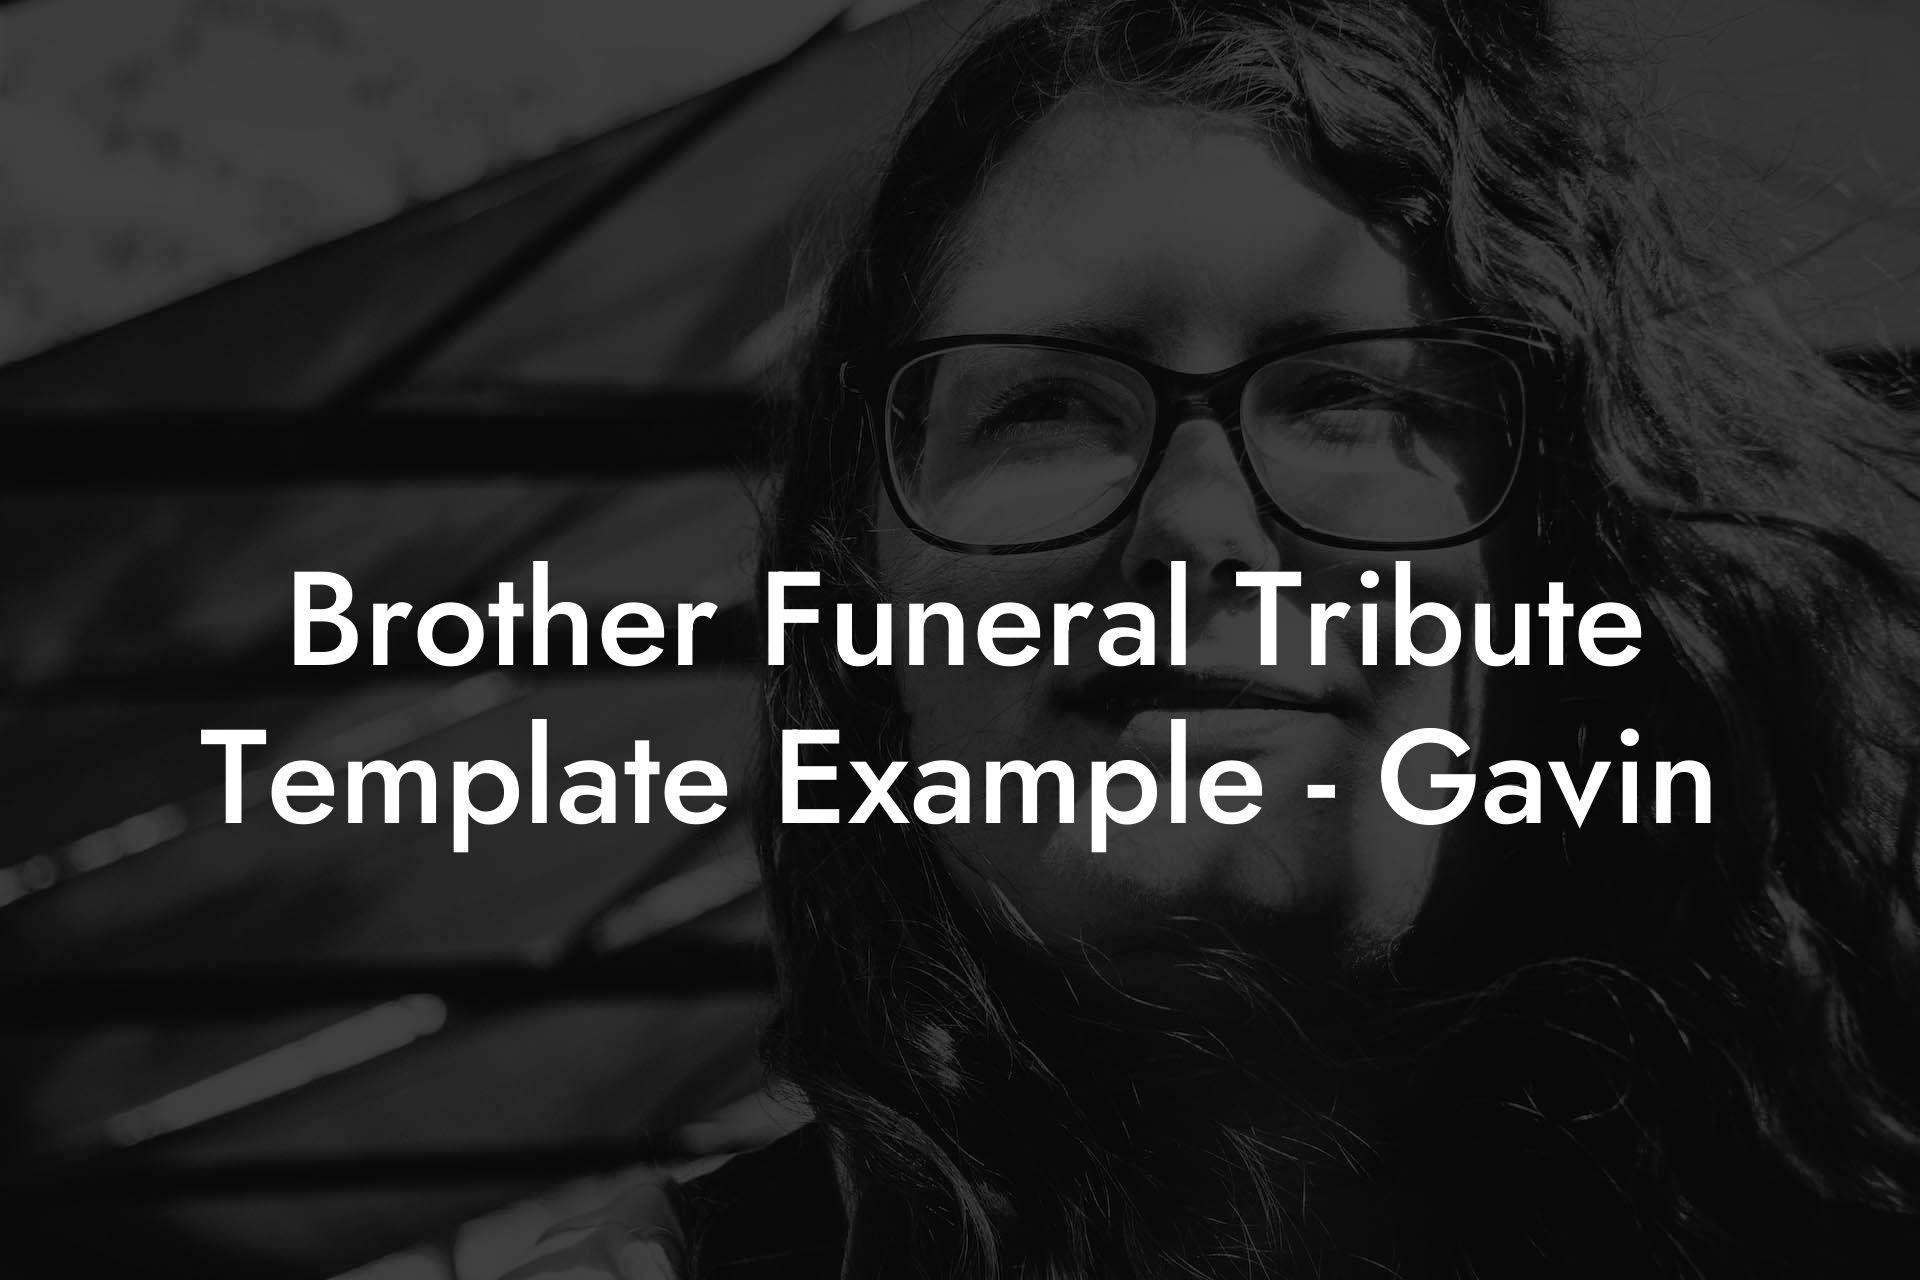 Brother Funeral Tribute Template Example - Gavin